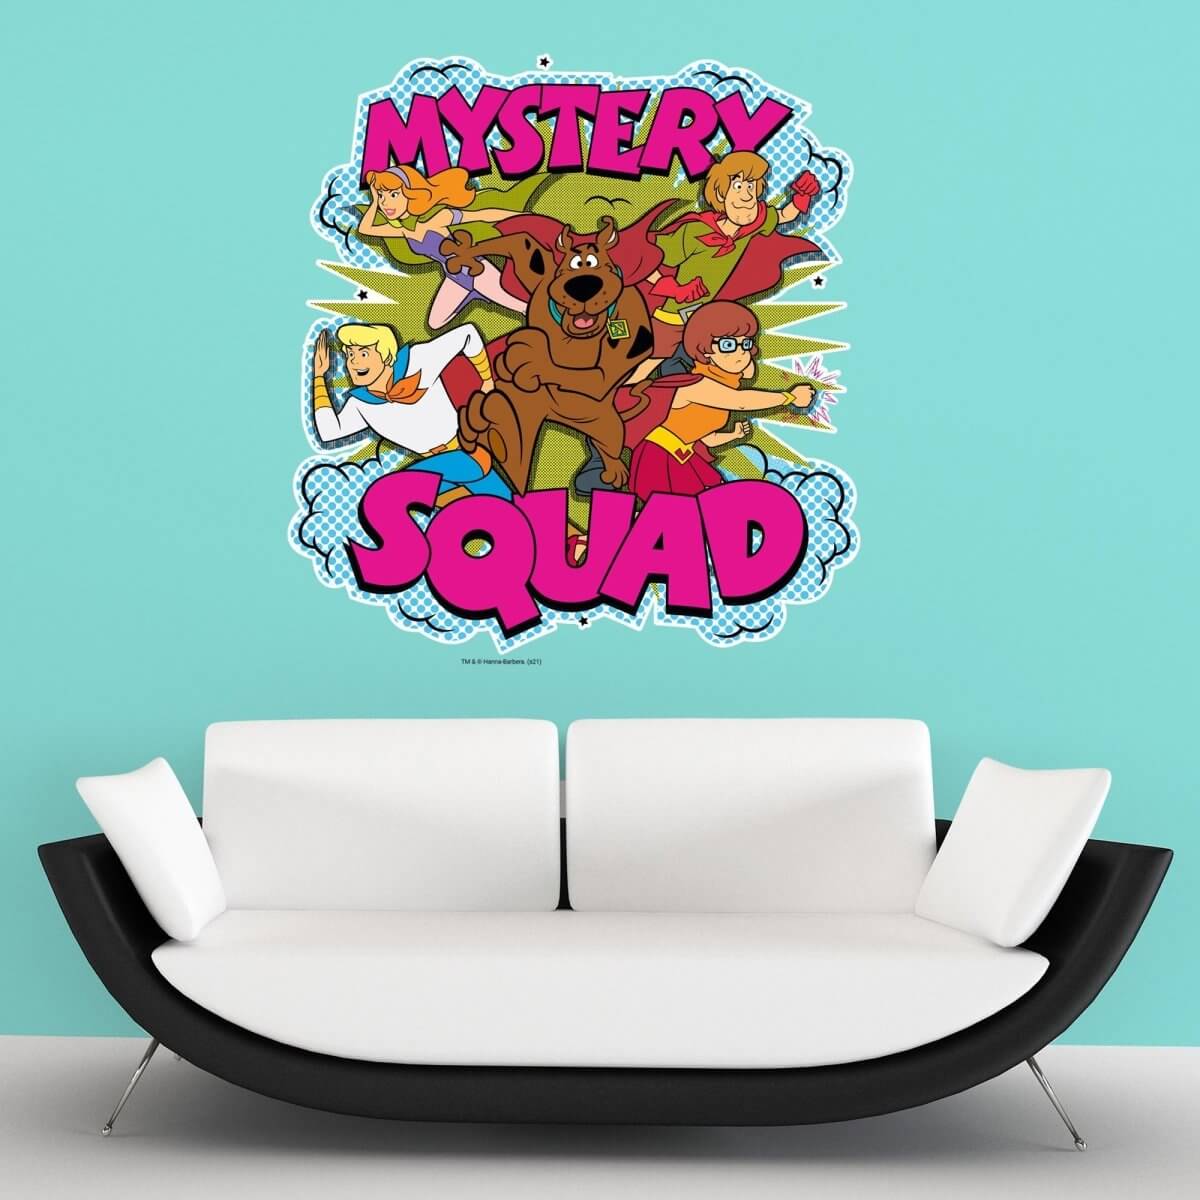 Kismet Decals Home & Room Decor Scooby-Doo and the Mystery Squad Wall decal sticker - officially licensed - latex printed with no solvent odor - Kismet Decals